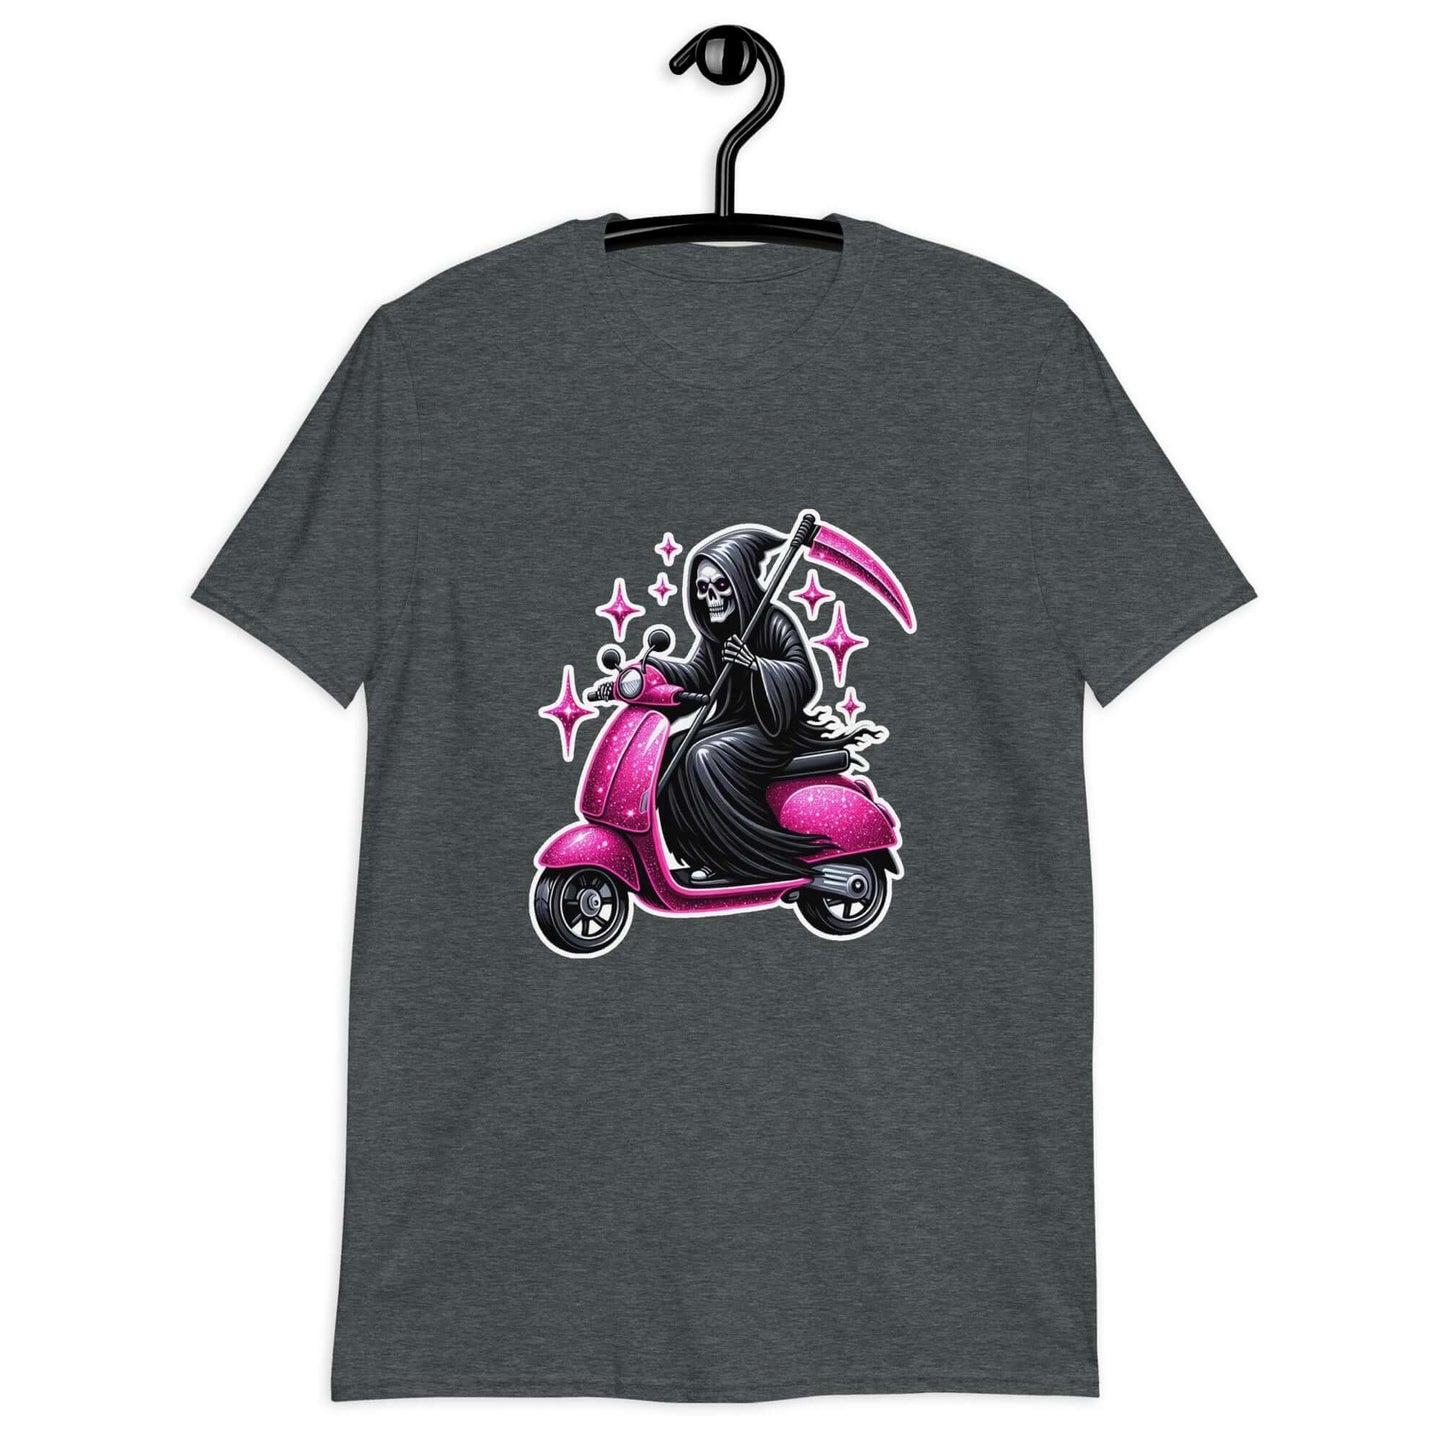 Dark heather grey t-shirt with an image of the Grim Reaper riding on a glam pink scooter printed on the front.